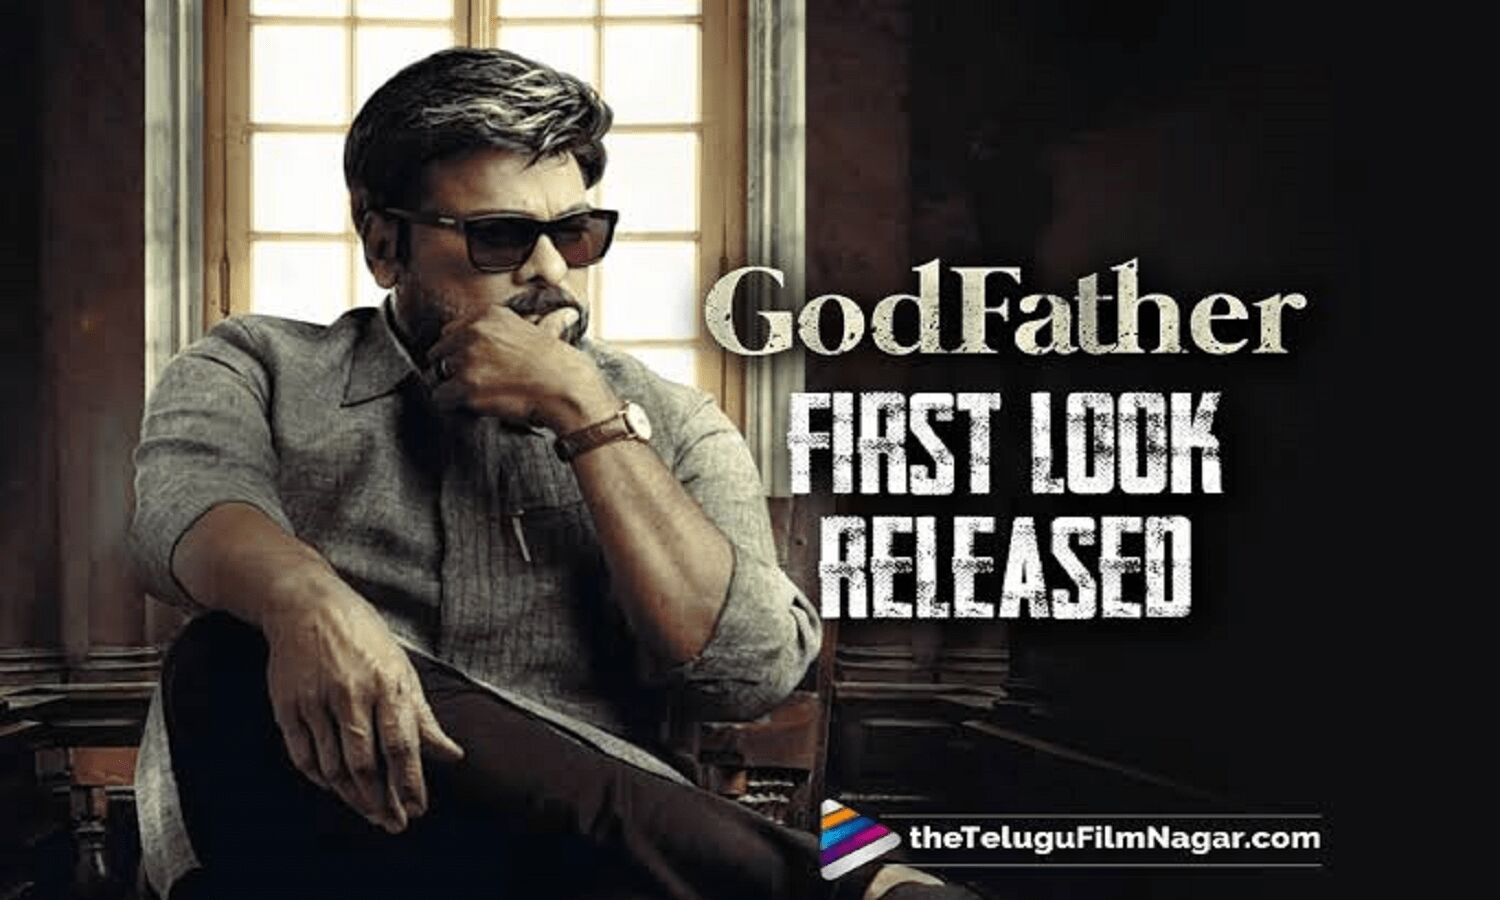 Salman Khan and Chiranjeevi’s movie Godfather will release on this day